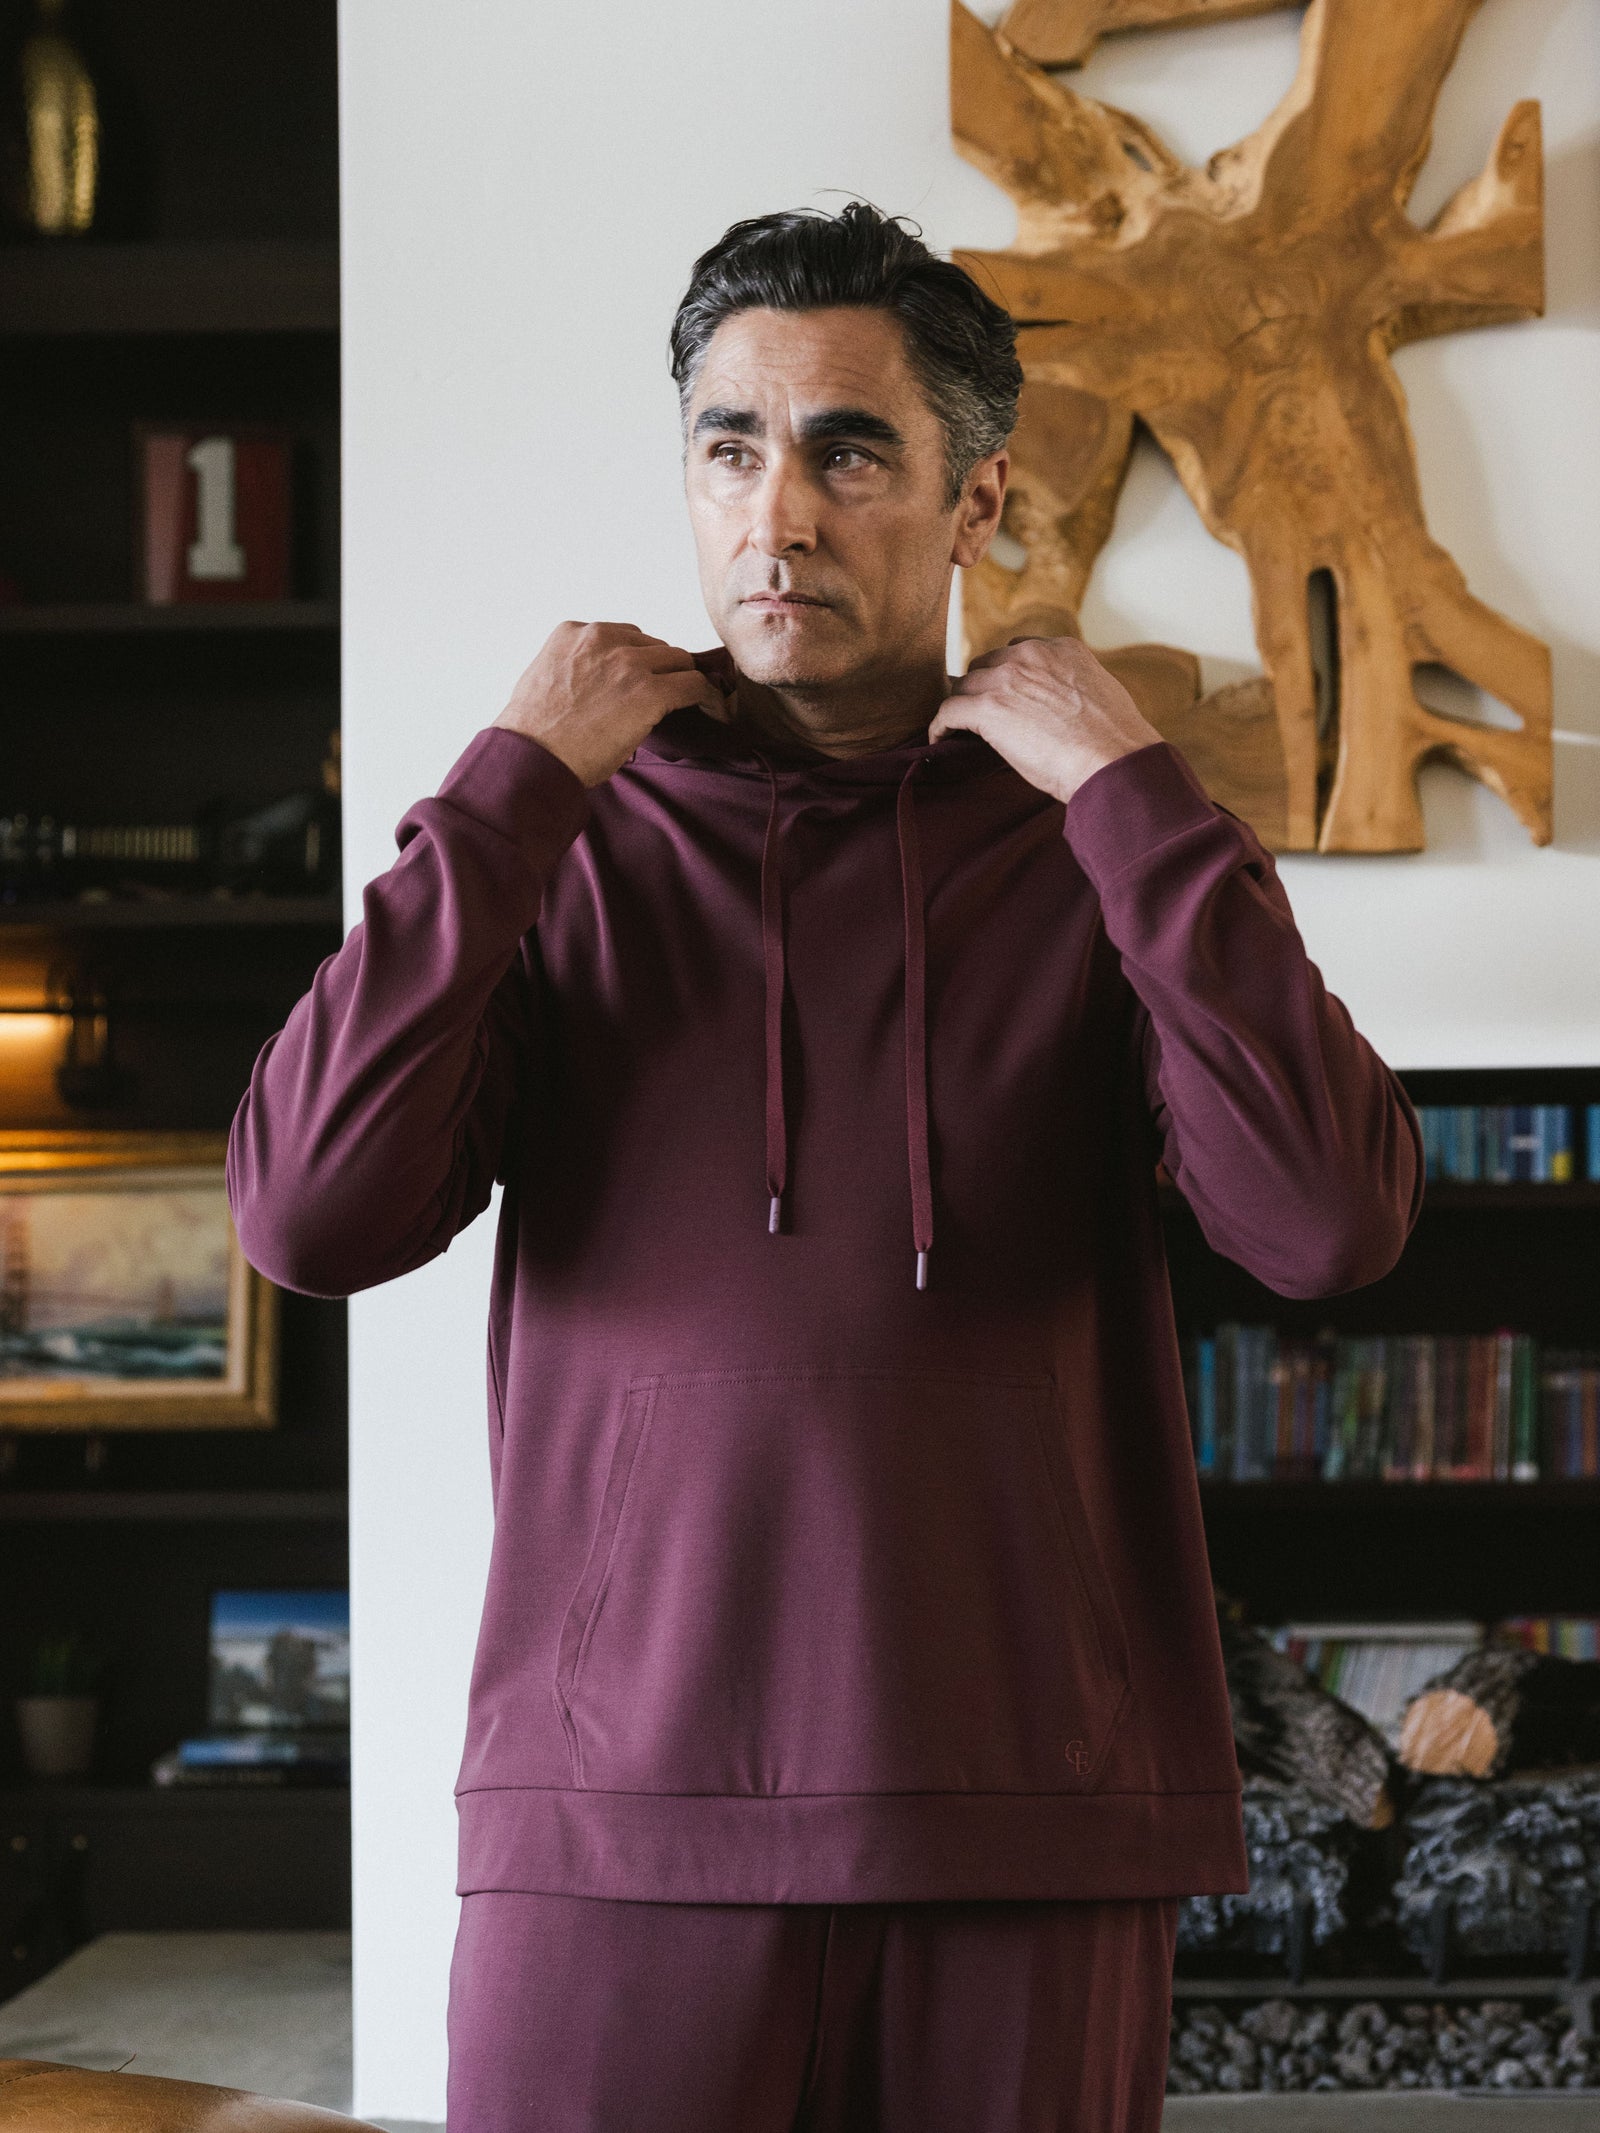 Burgundy Bamboo Hoodie worn by man standing in a living room of a house. The man is adjusting the hood of the hoodie